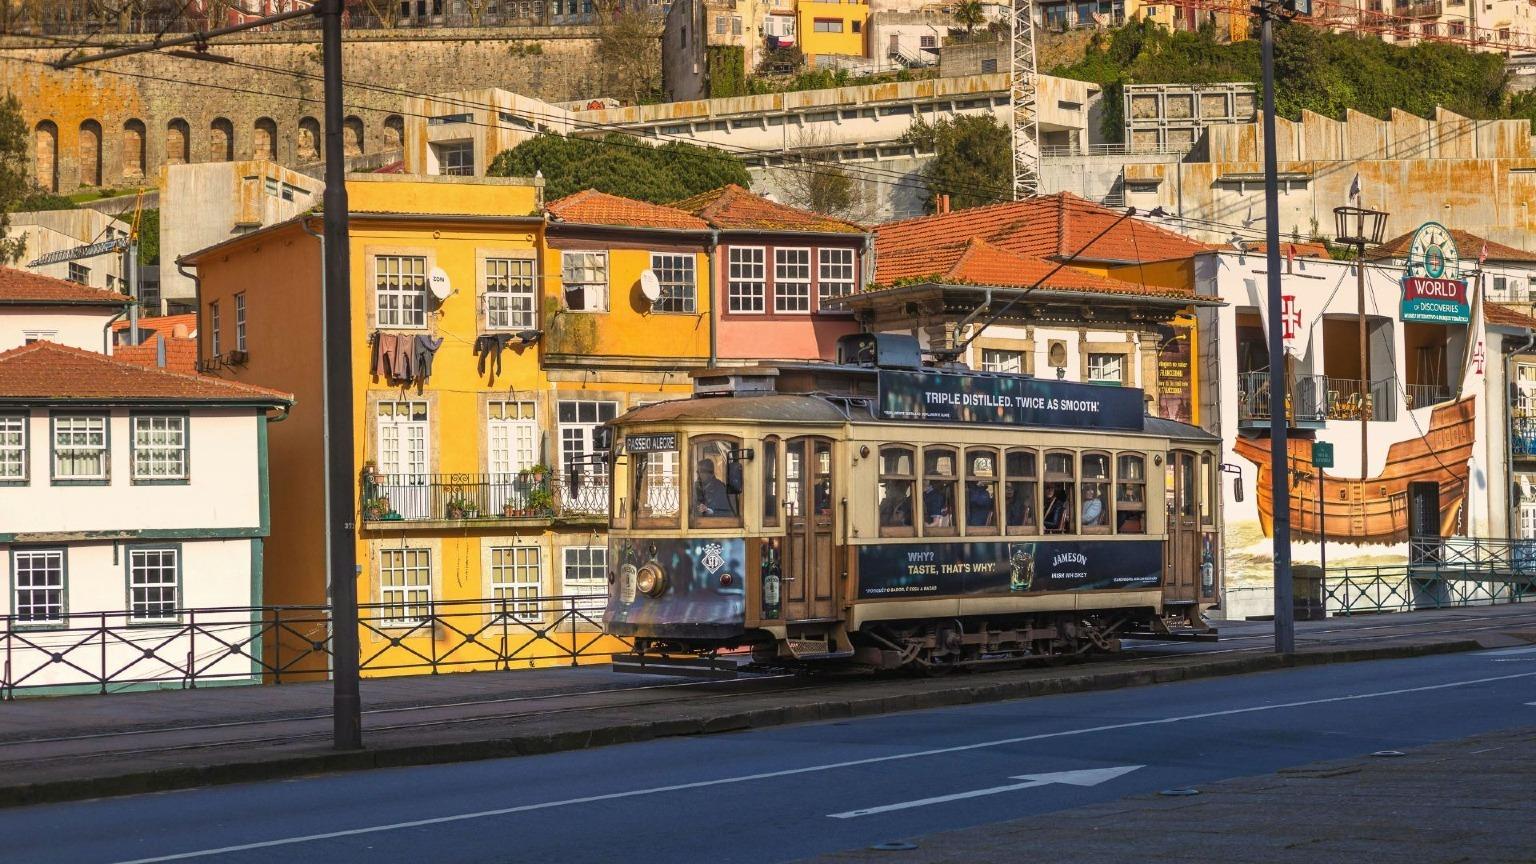 The iconic historic Tram number 1 traverses through Porto's charming historic area, surrounded by colorful buildings.